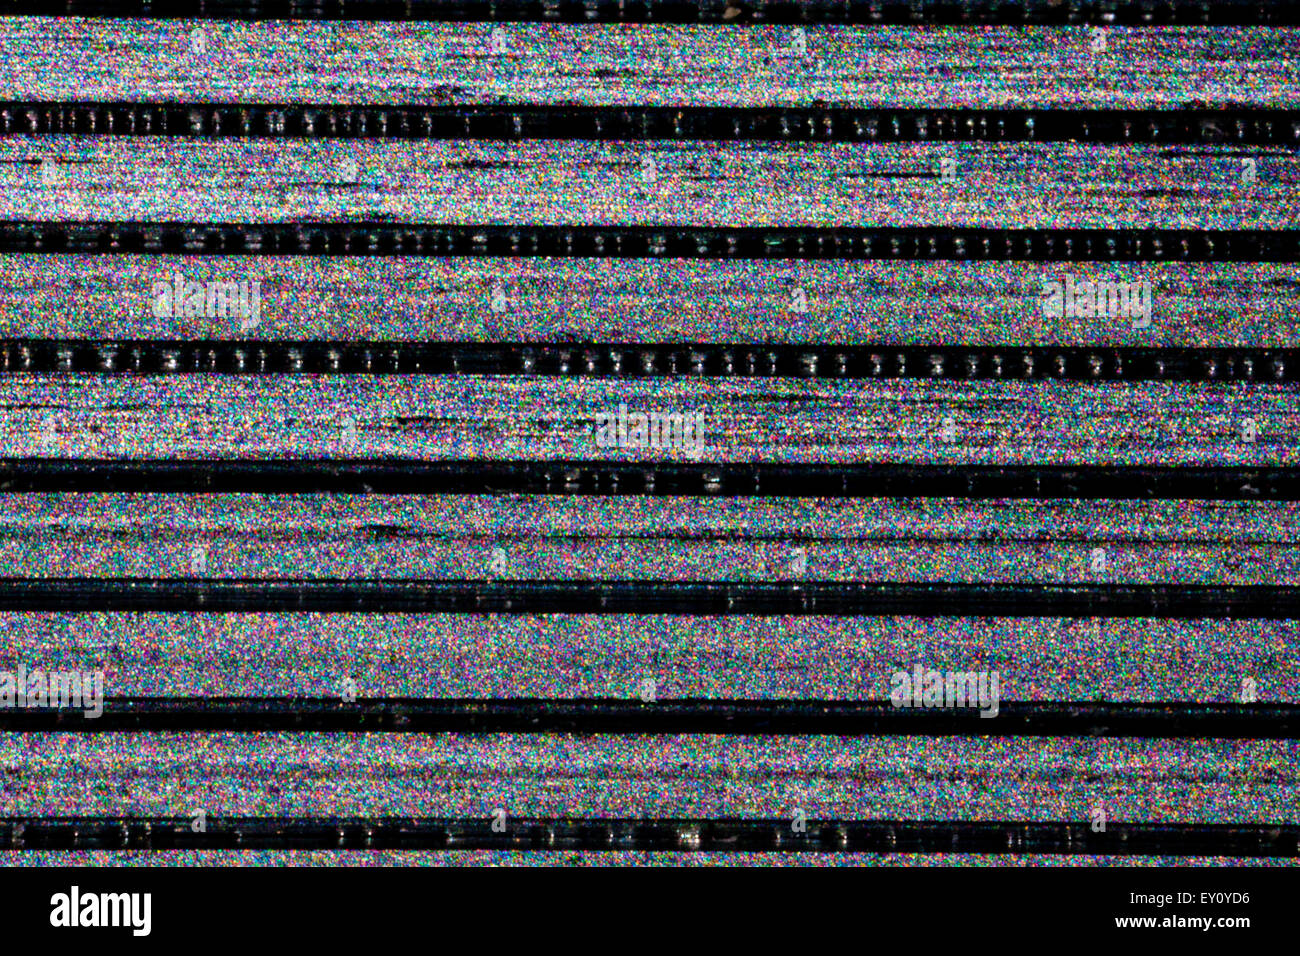 speckles in staples caused by interference of reflected partially coherent sunlight. Context is shown in image EY0YDA Stock Photo